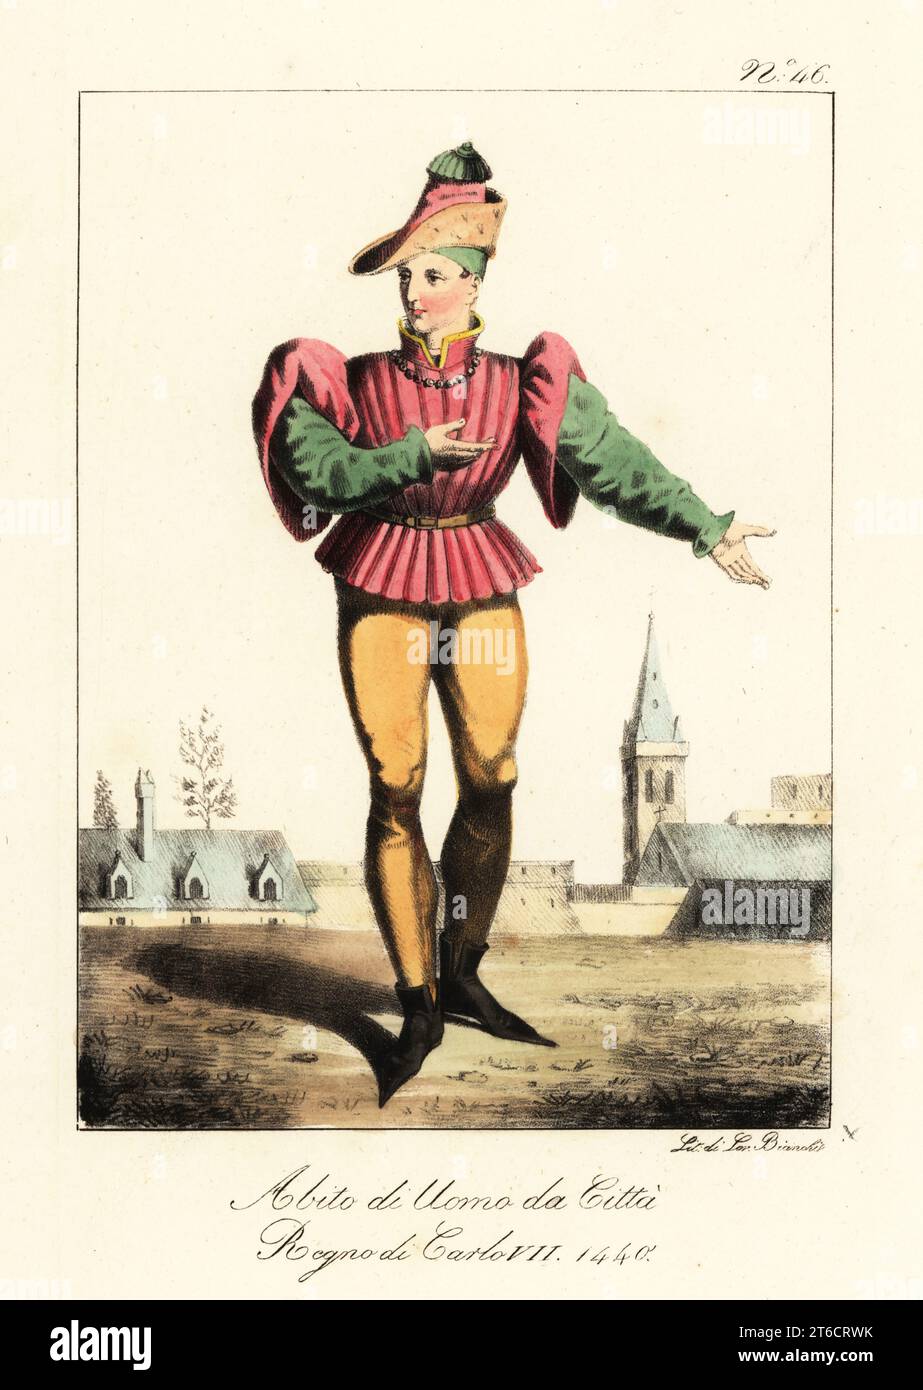 Costume of a French bourgeois man, reign of King Charles VII, 1440. In peaked cap, pleated doublet with puff sleeves, hose, and bootlets. Costume des hommes a la ville. Regne de Charles VII. Handcoloured lithograph by Lorenzo Bianchi after Hippolyte Lecomte from Costumi civili e militari della monarchia francese dal 1200 al 1820, Naples, 1825. Italian edition of Lecomtes Civilian and military costumes of the French monarchy from 1200 to 1820. Stock Photo